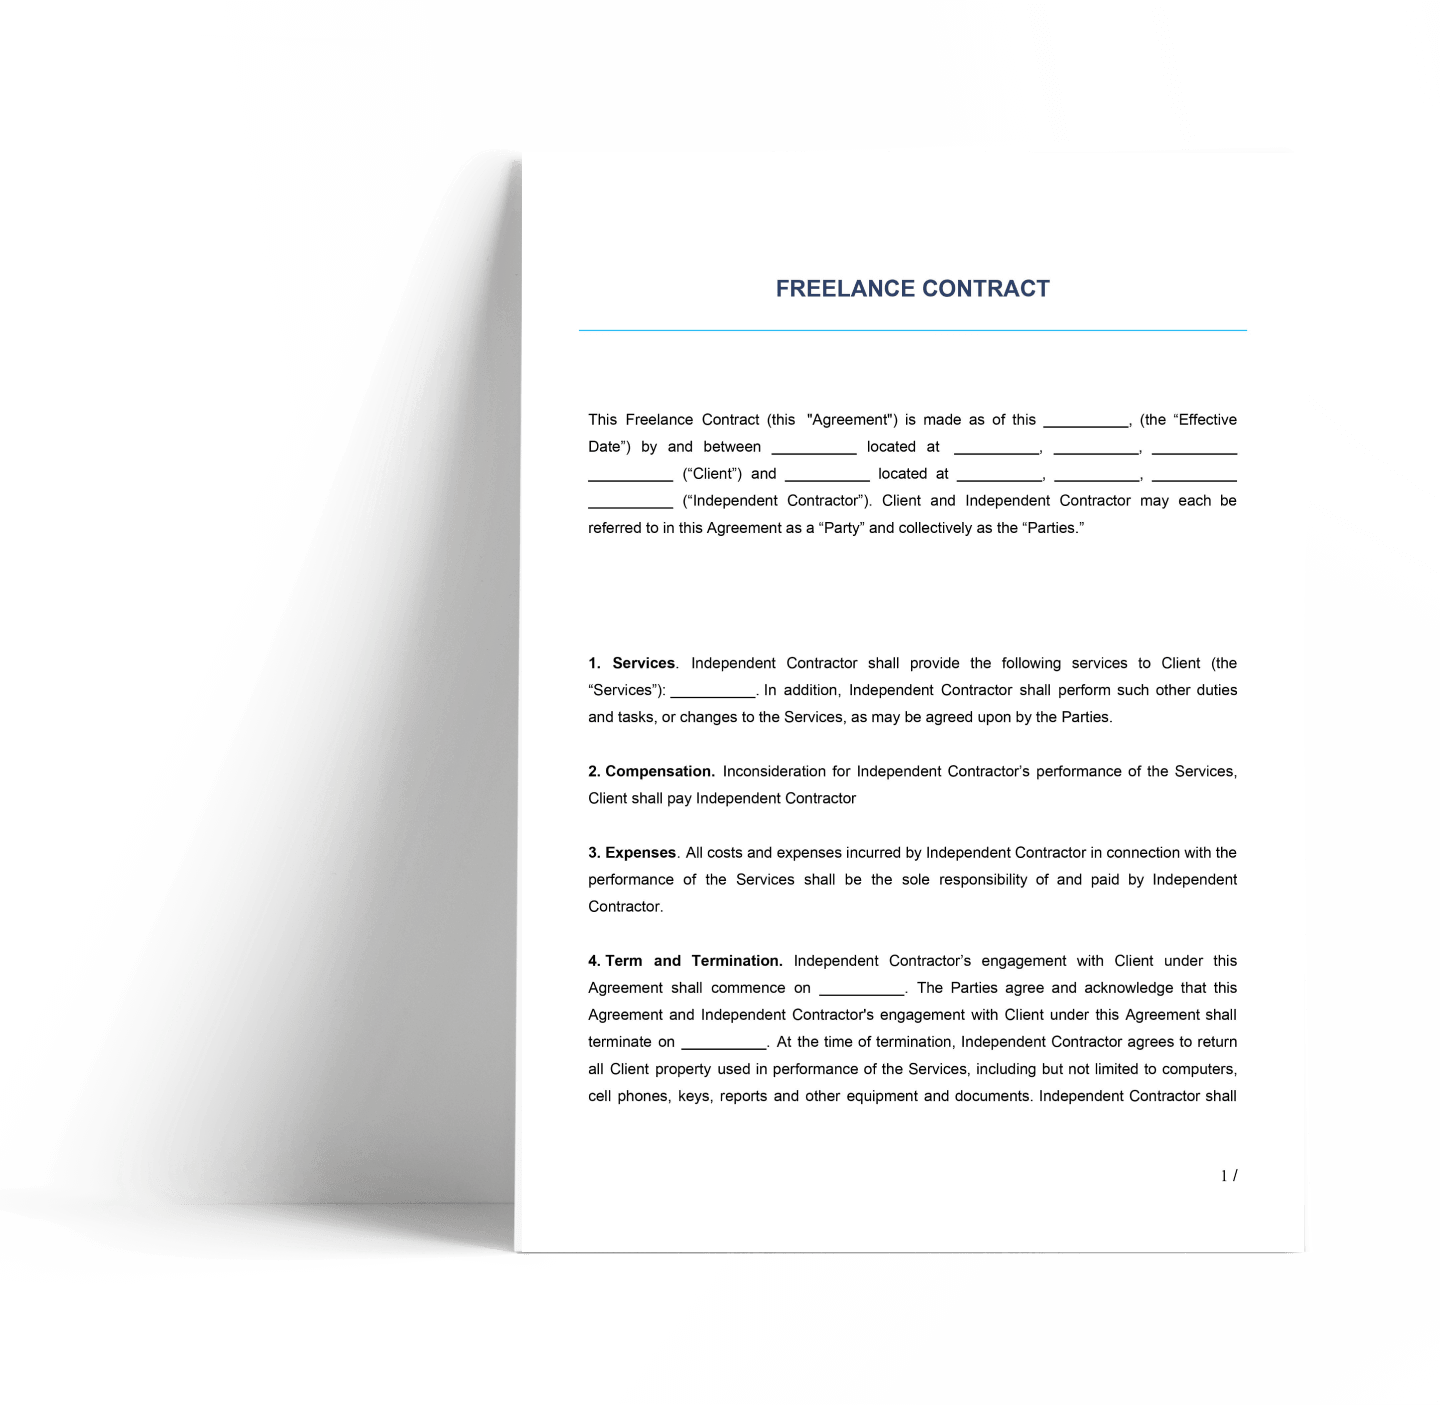 Download a freelance contract template